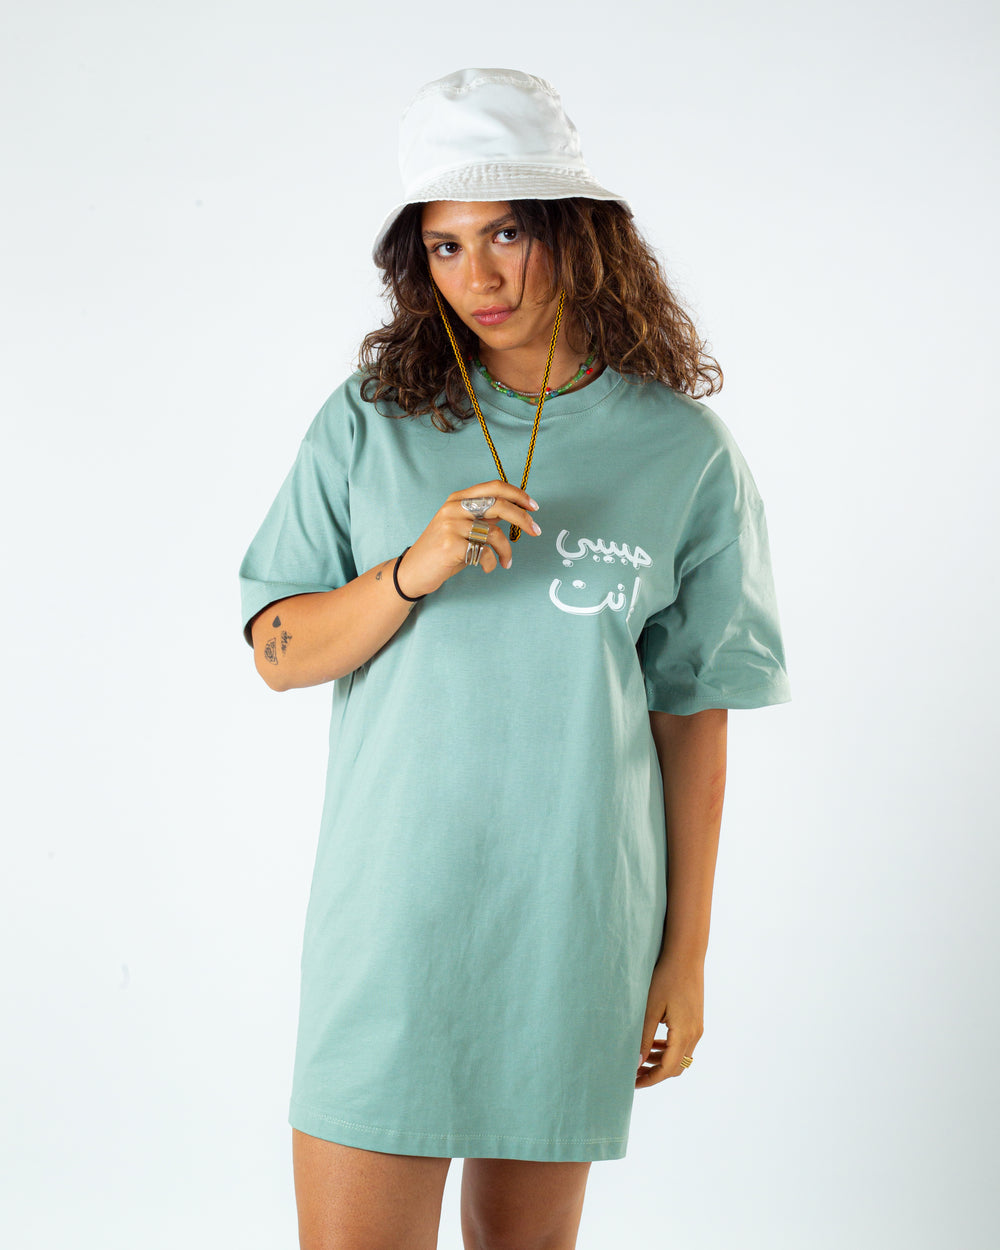 Young adult female wearing an Oversized mint T-dress with Habibi Enta written in arabic حبيبي إنت and printed in white silkscreen on the side of the T-Dress along with a white hat on her head.